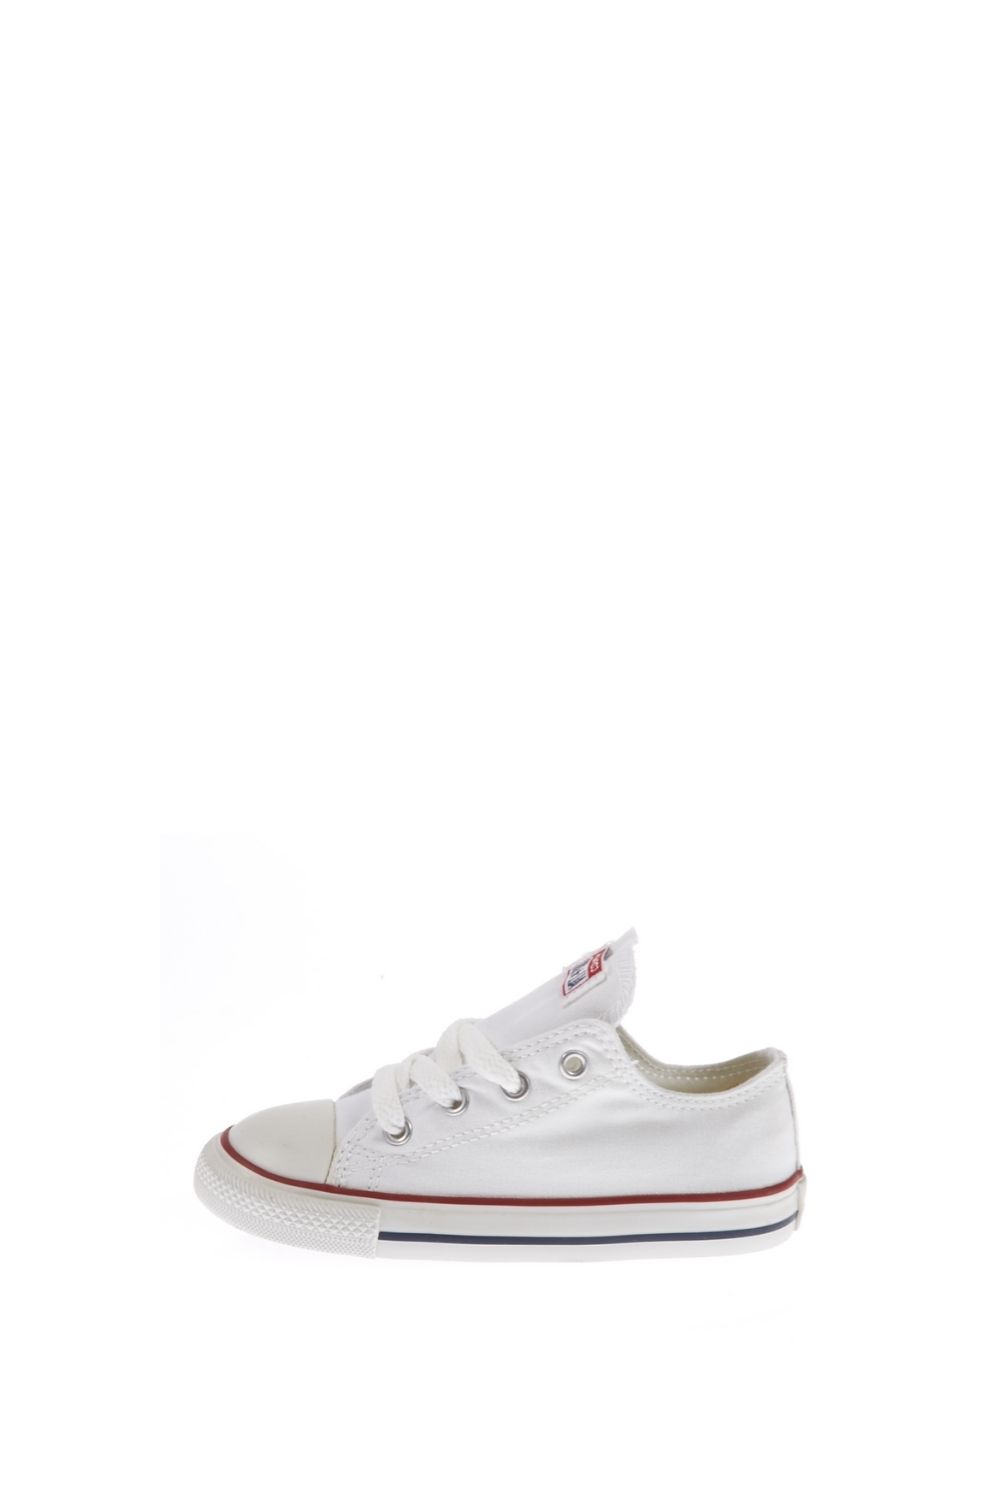 CONVERSE - Βρεφικά παπούτσια Chuck Taylor λευκά Παιδικά/Baby/Παπούτσια/Sneakers